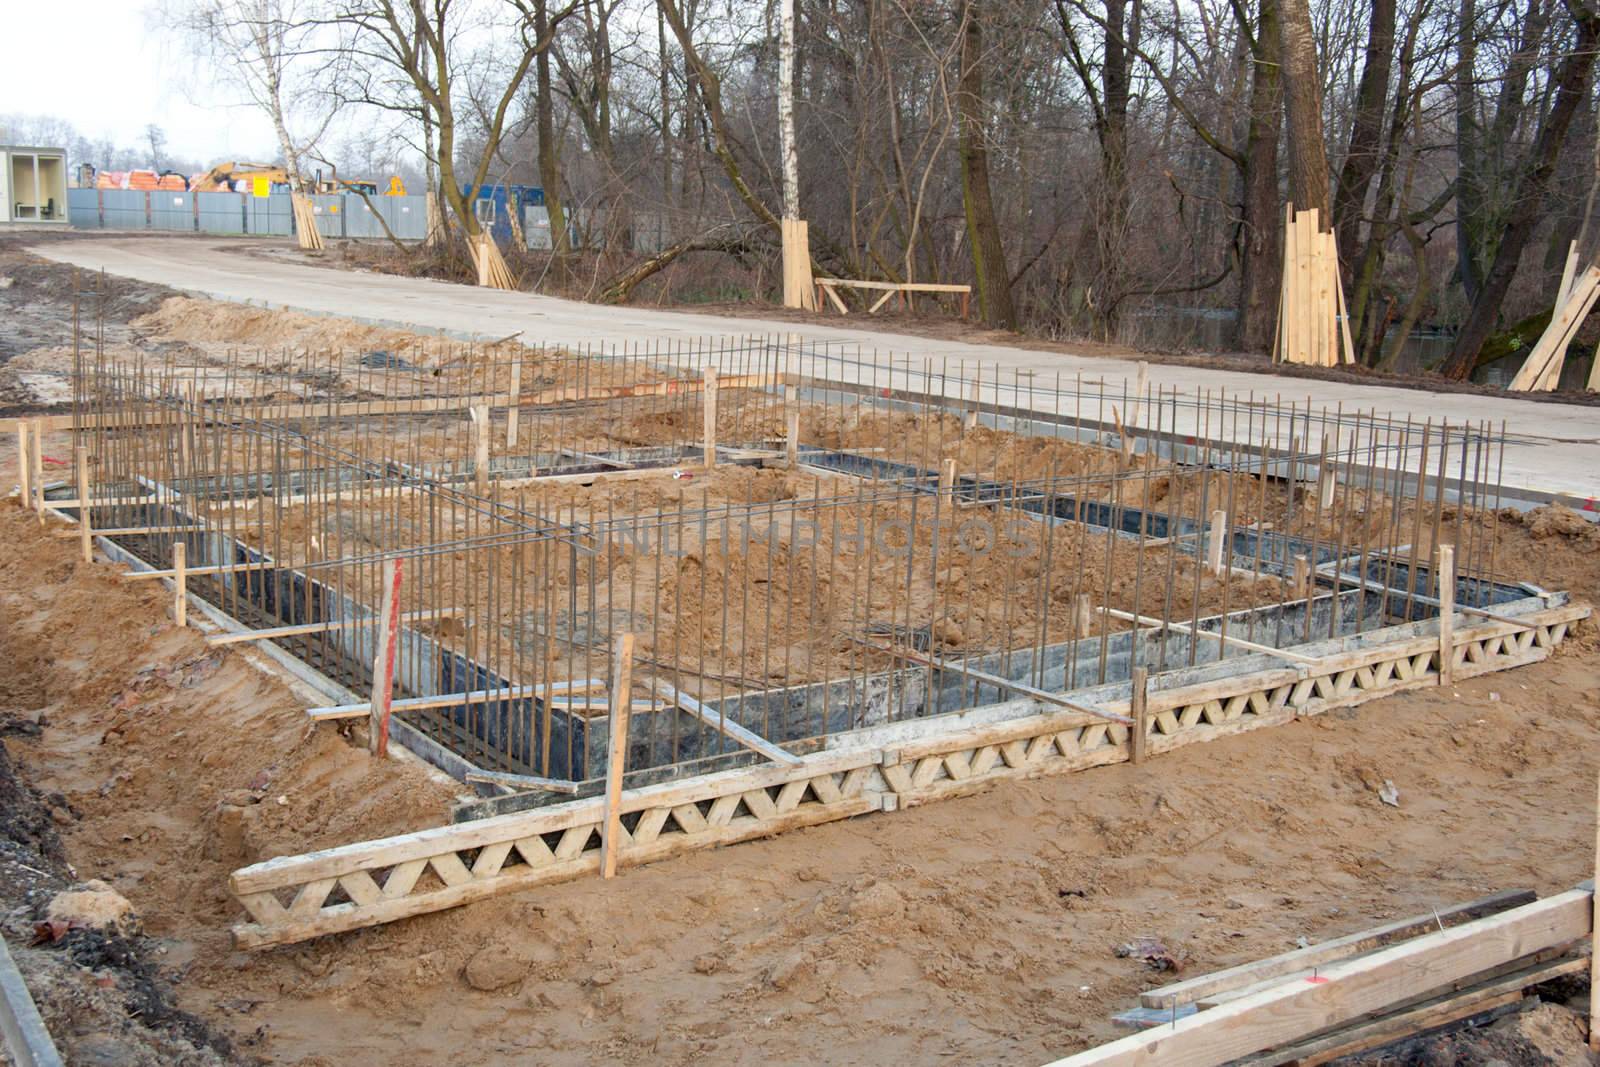 The skeleton of foundations under new building